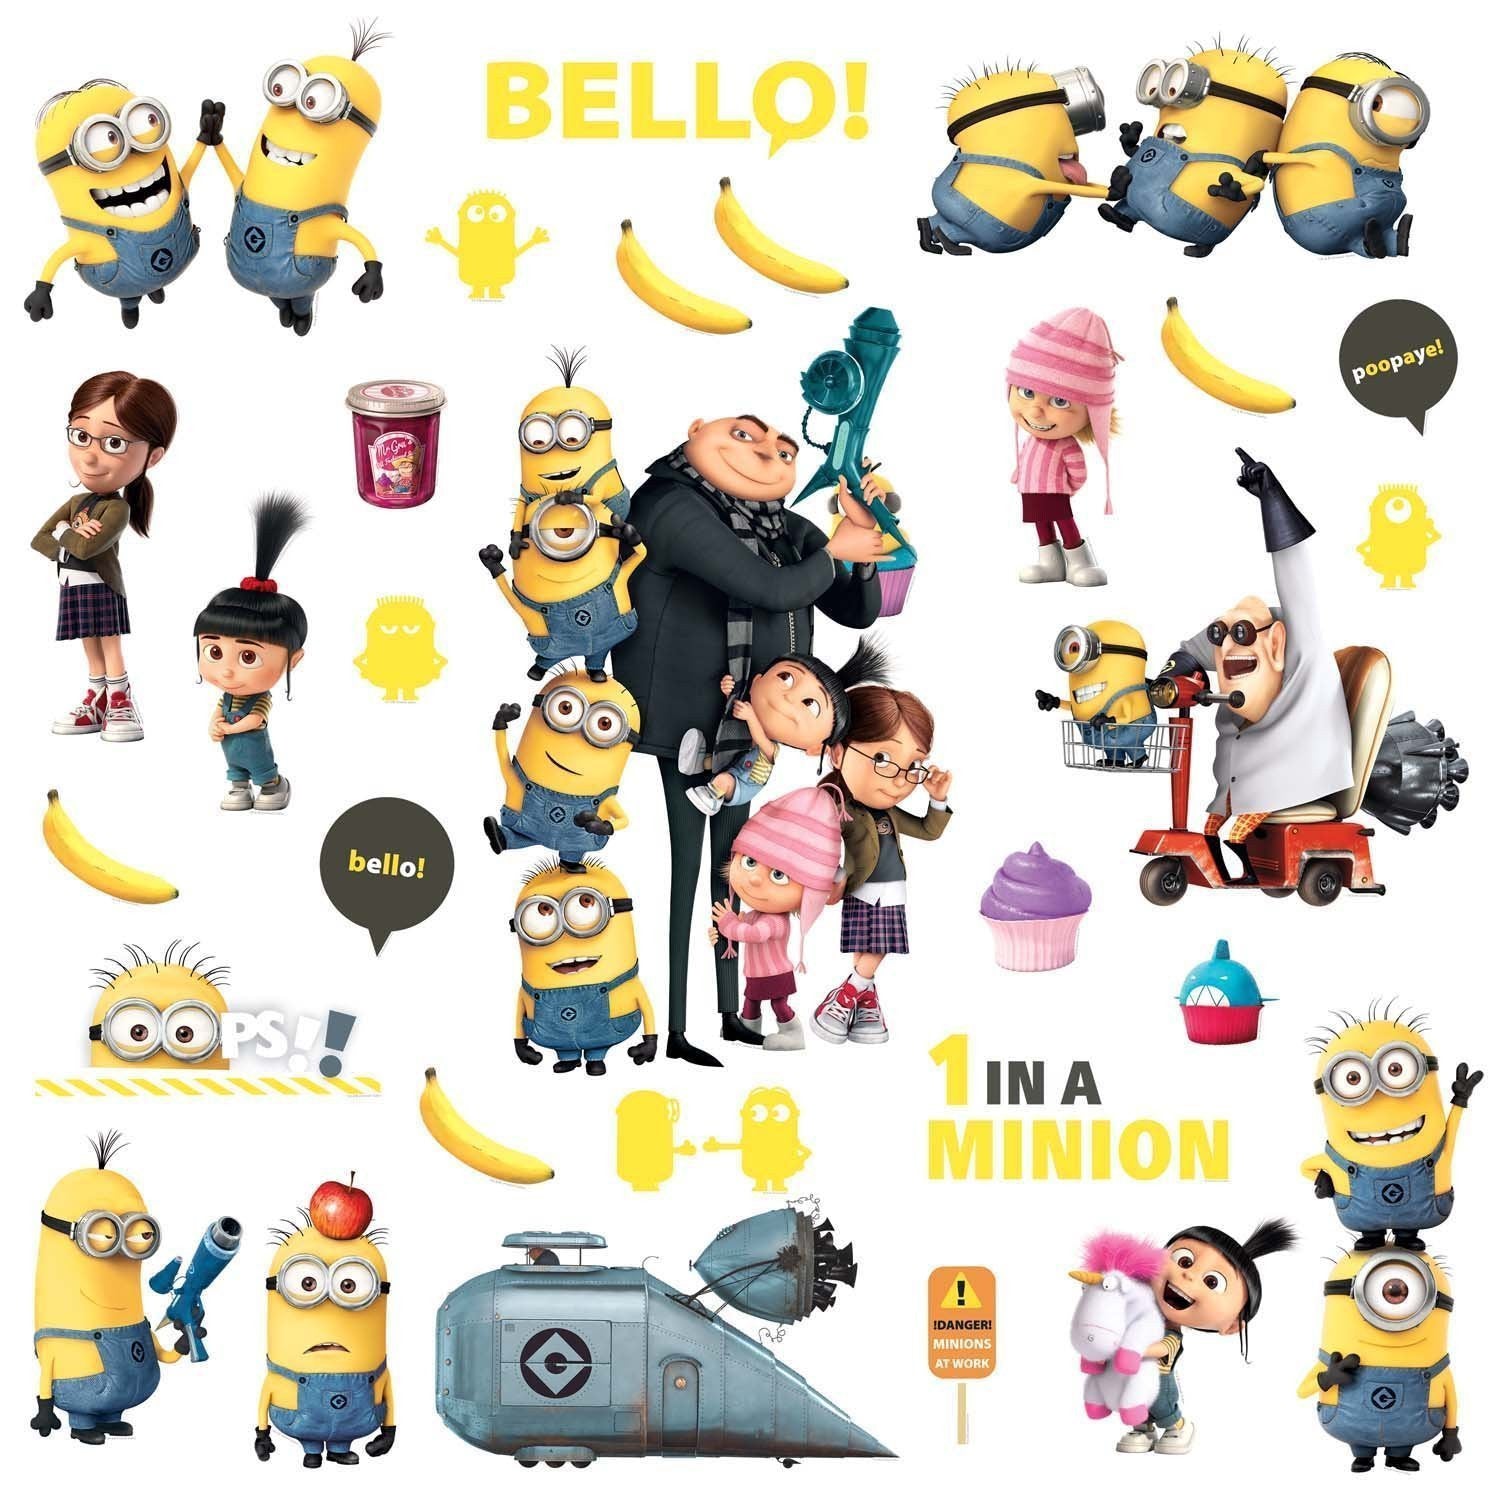 RoomMates Despicable Me 2 Peel and Stick Wall Decals